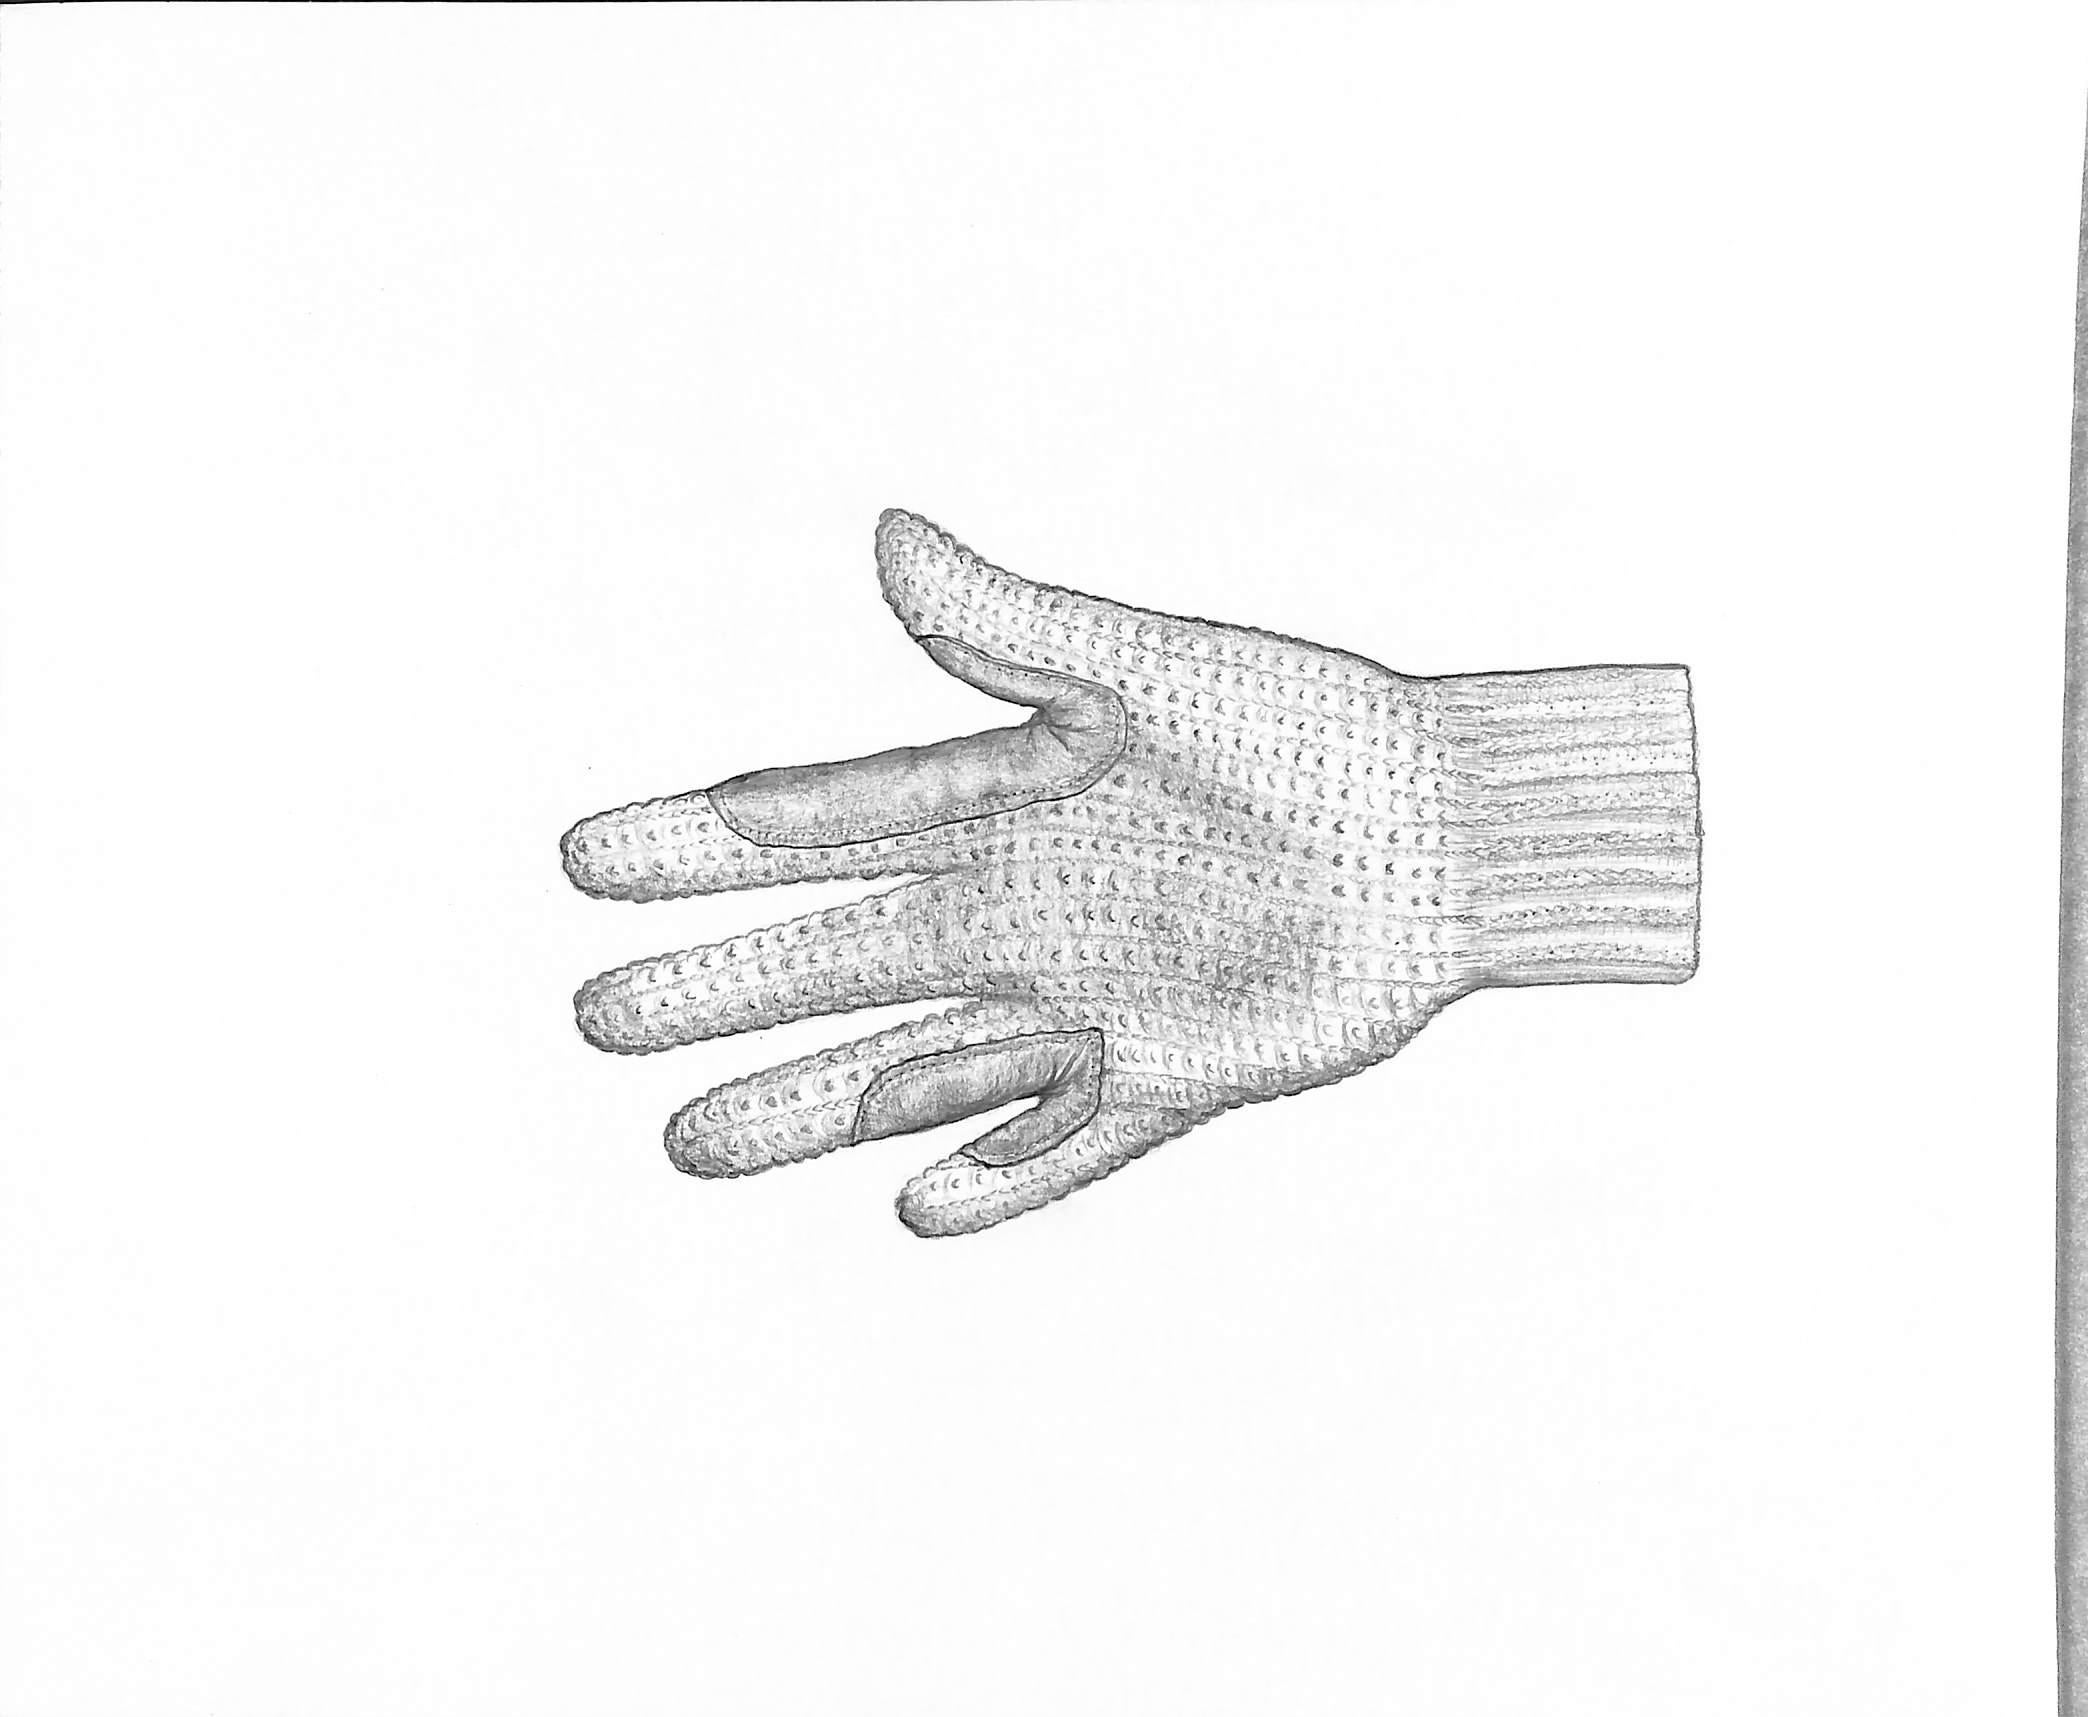 Ladies Cotton Knit/ Leather Reinforced Glove 2000 Graphite Drawing - Art by Unknown